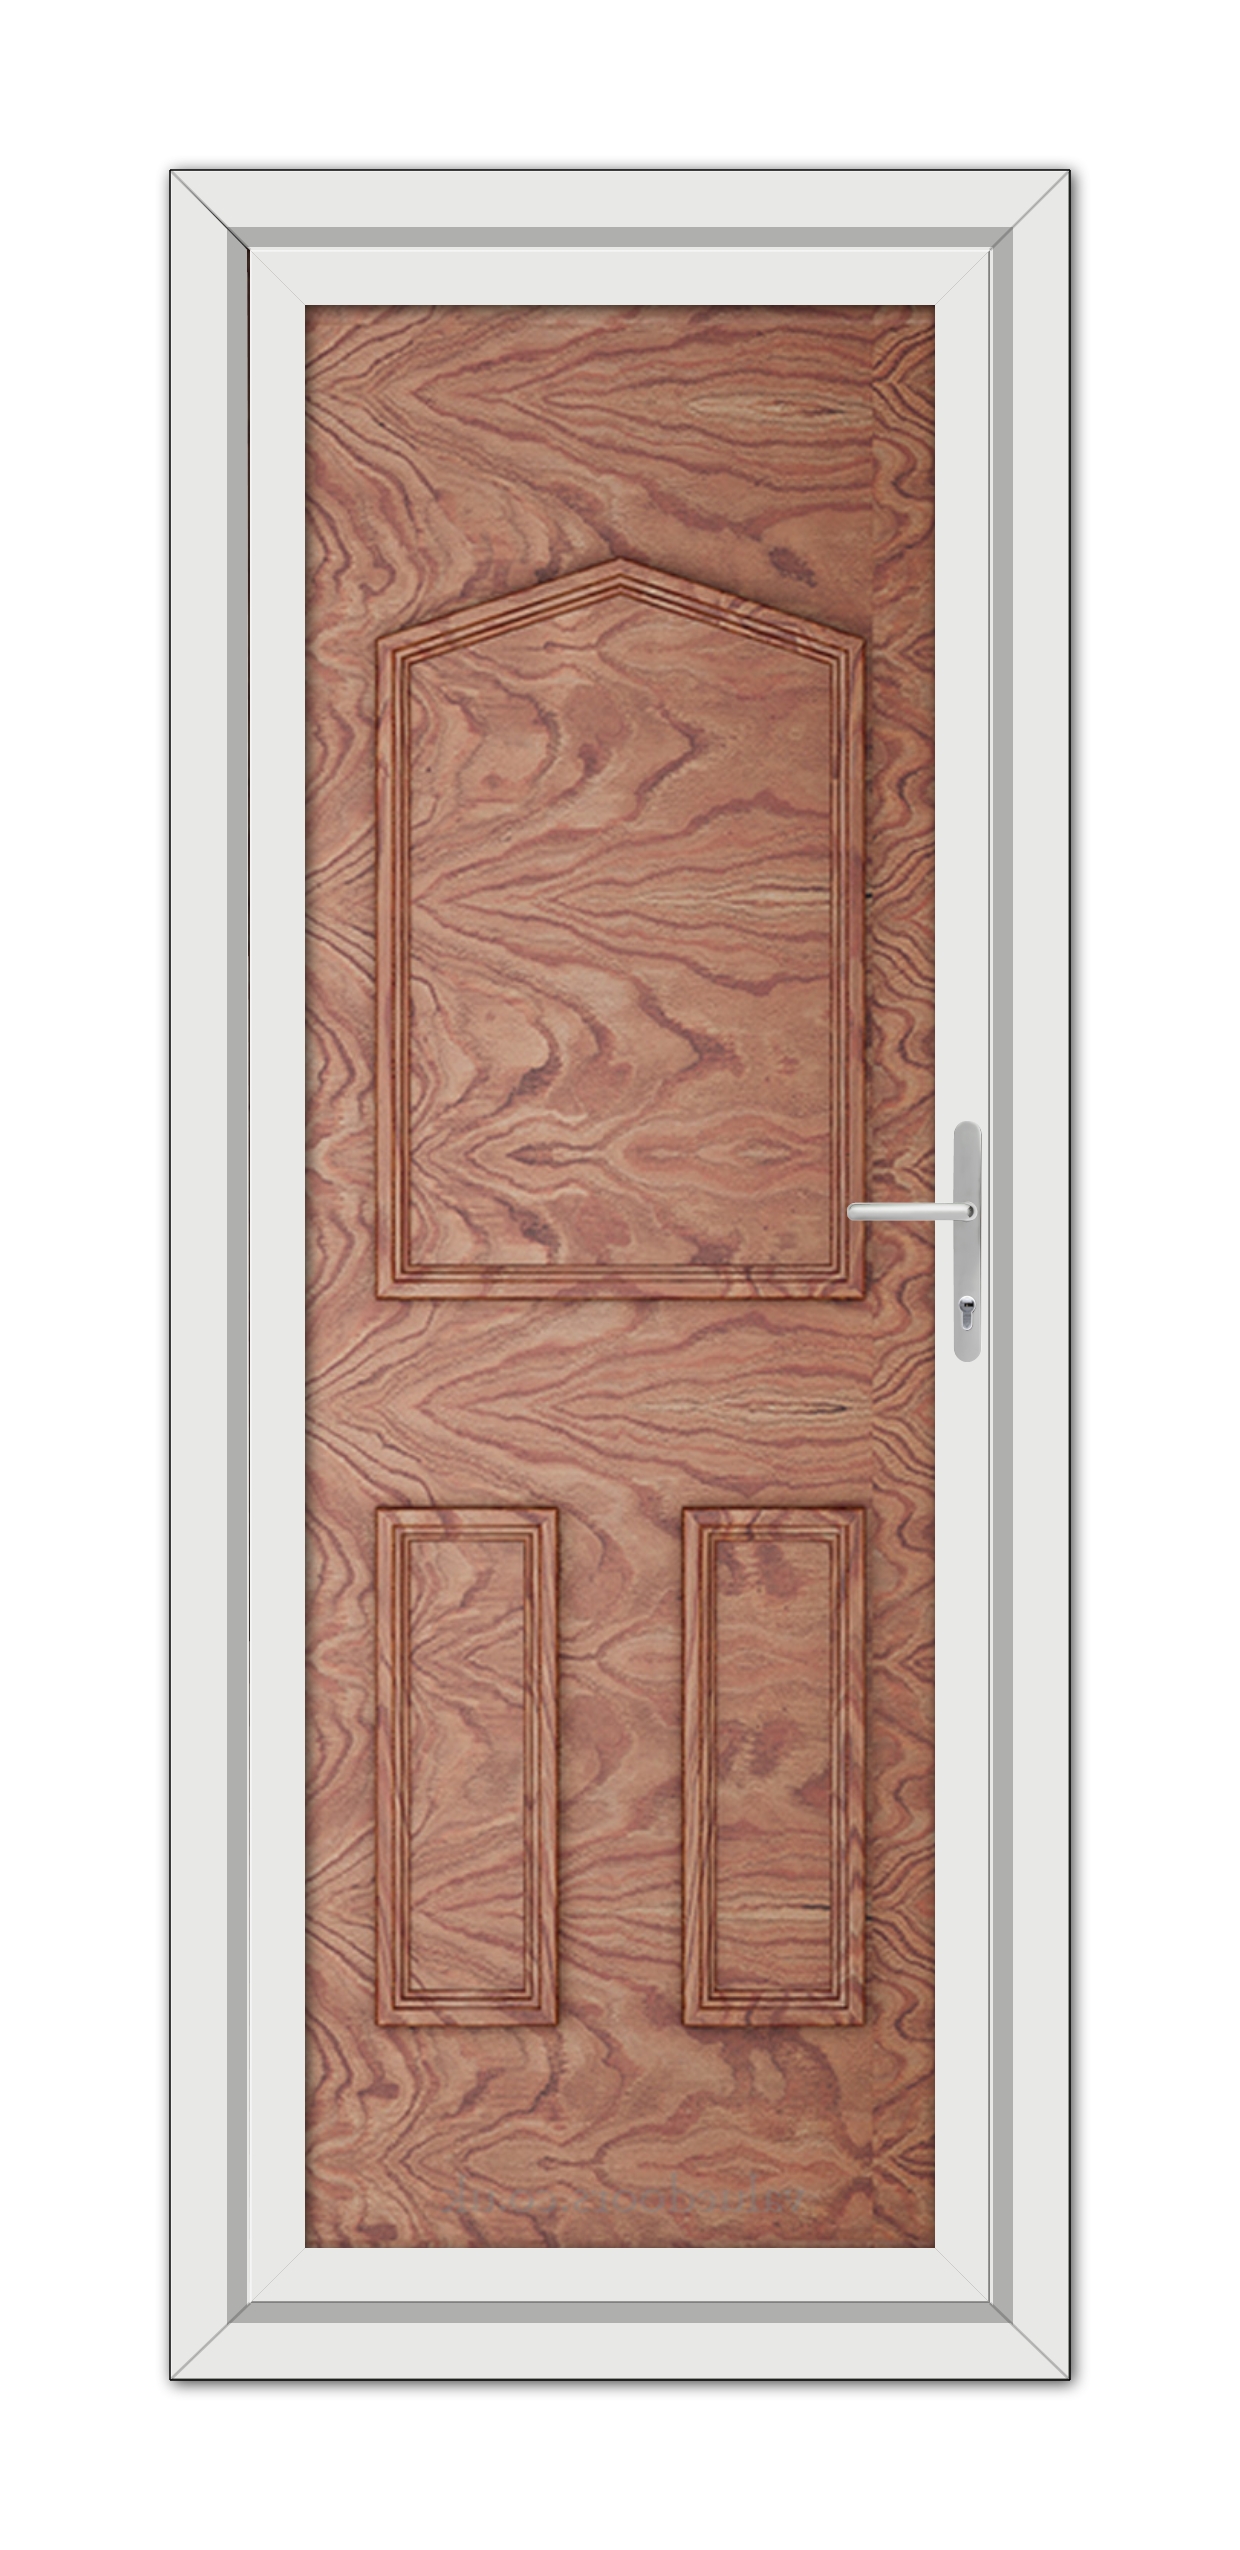 Vertical image of a closed Solid Oak Oxford Solid uPVC Door with rectangular panels and a metal handle, framed by a white door frame.